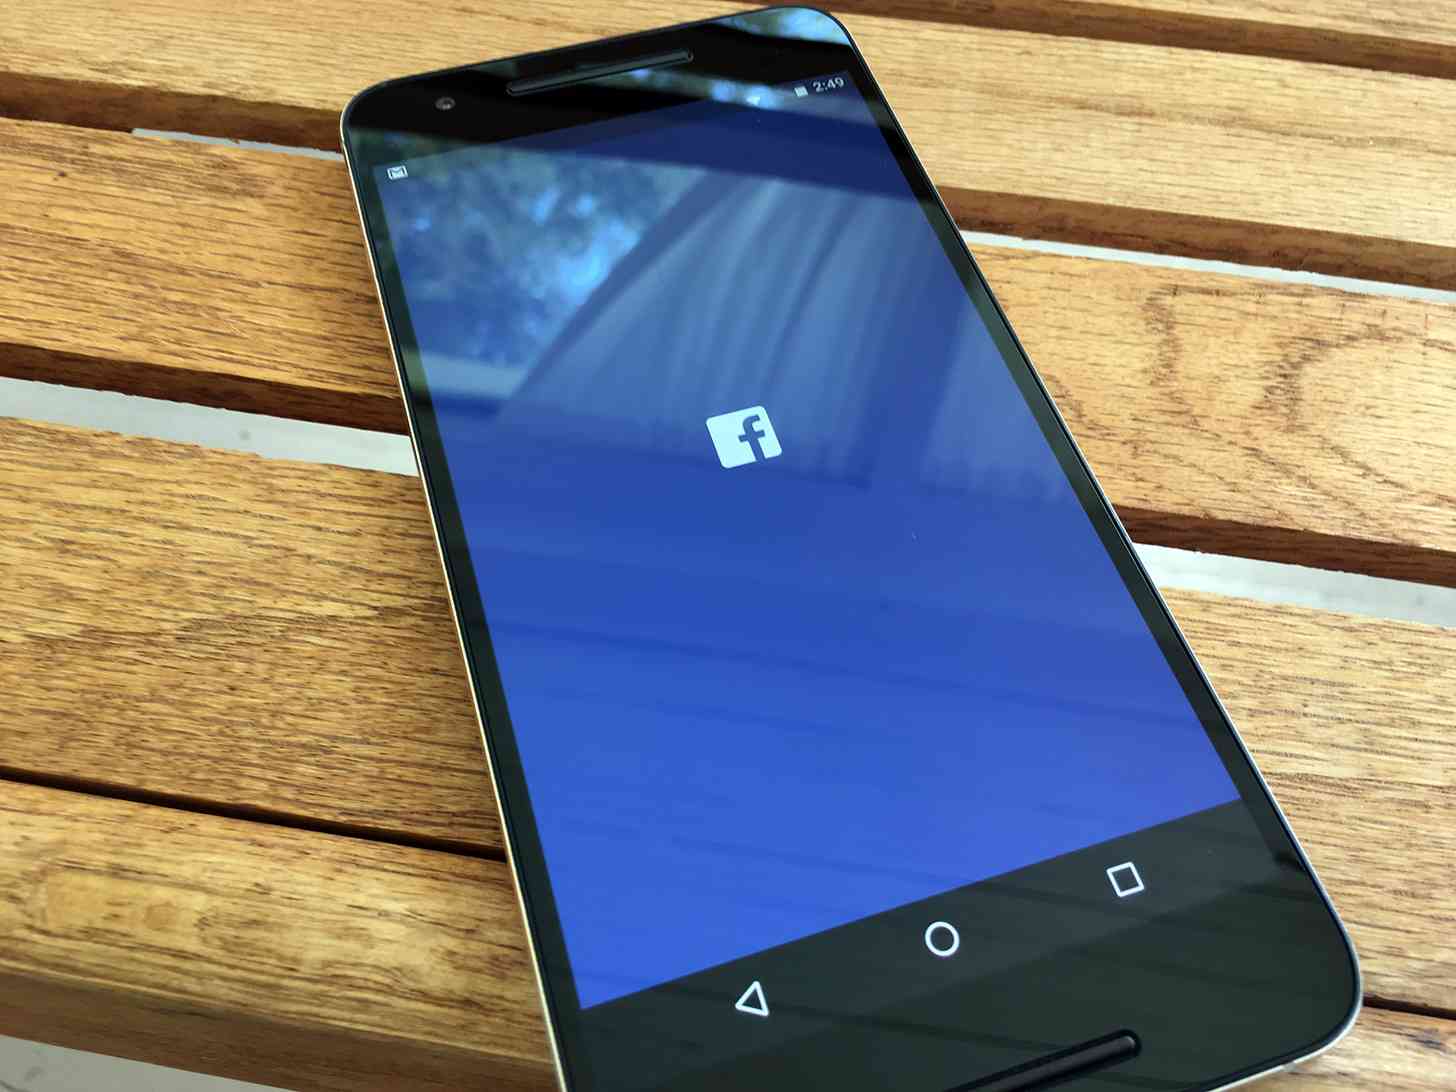 Facebook Android app